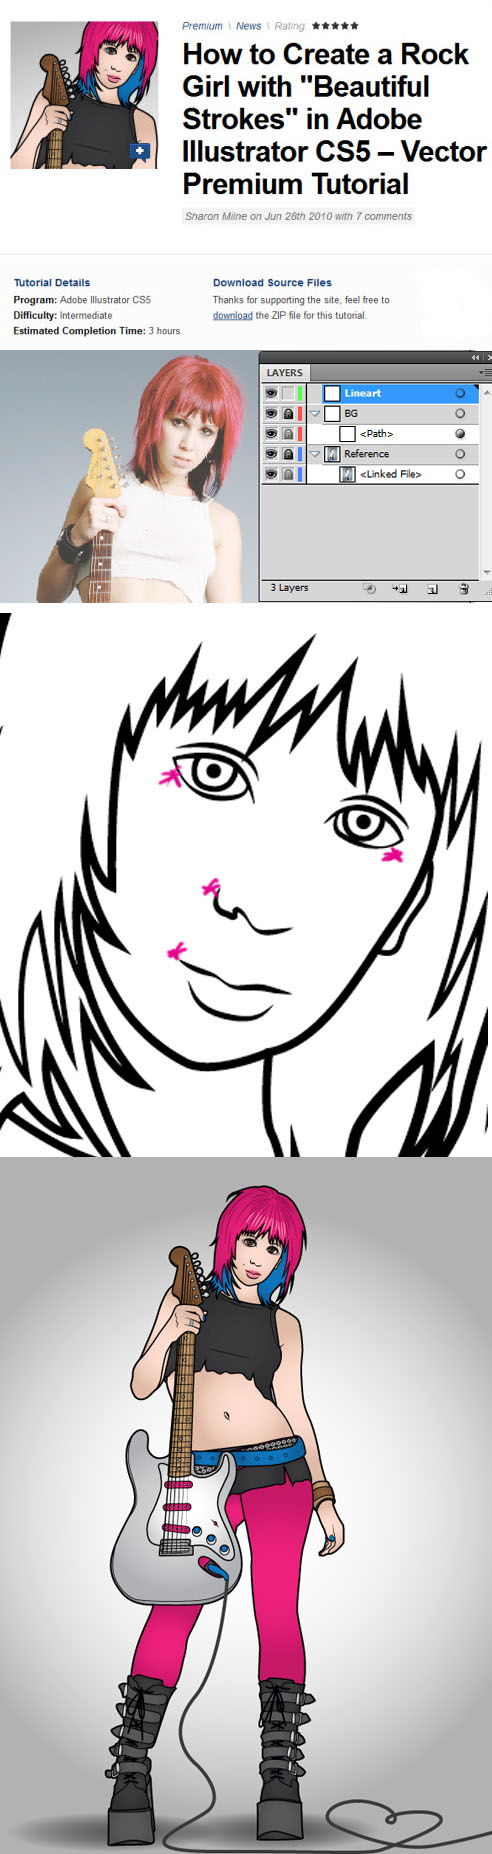 Vector Tuts+ How to Create a Rock Girl with "Beautiful Strokes" in Adobe Illustrator CS5 